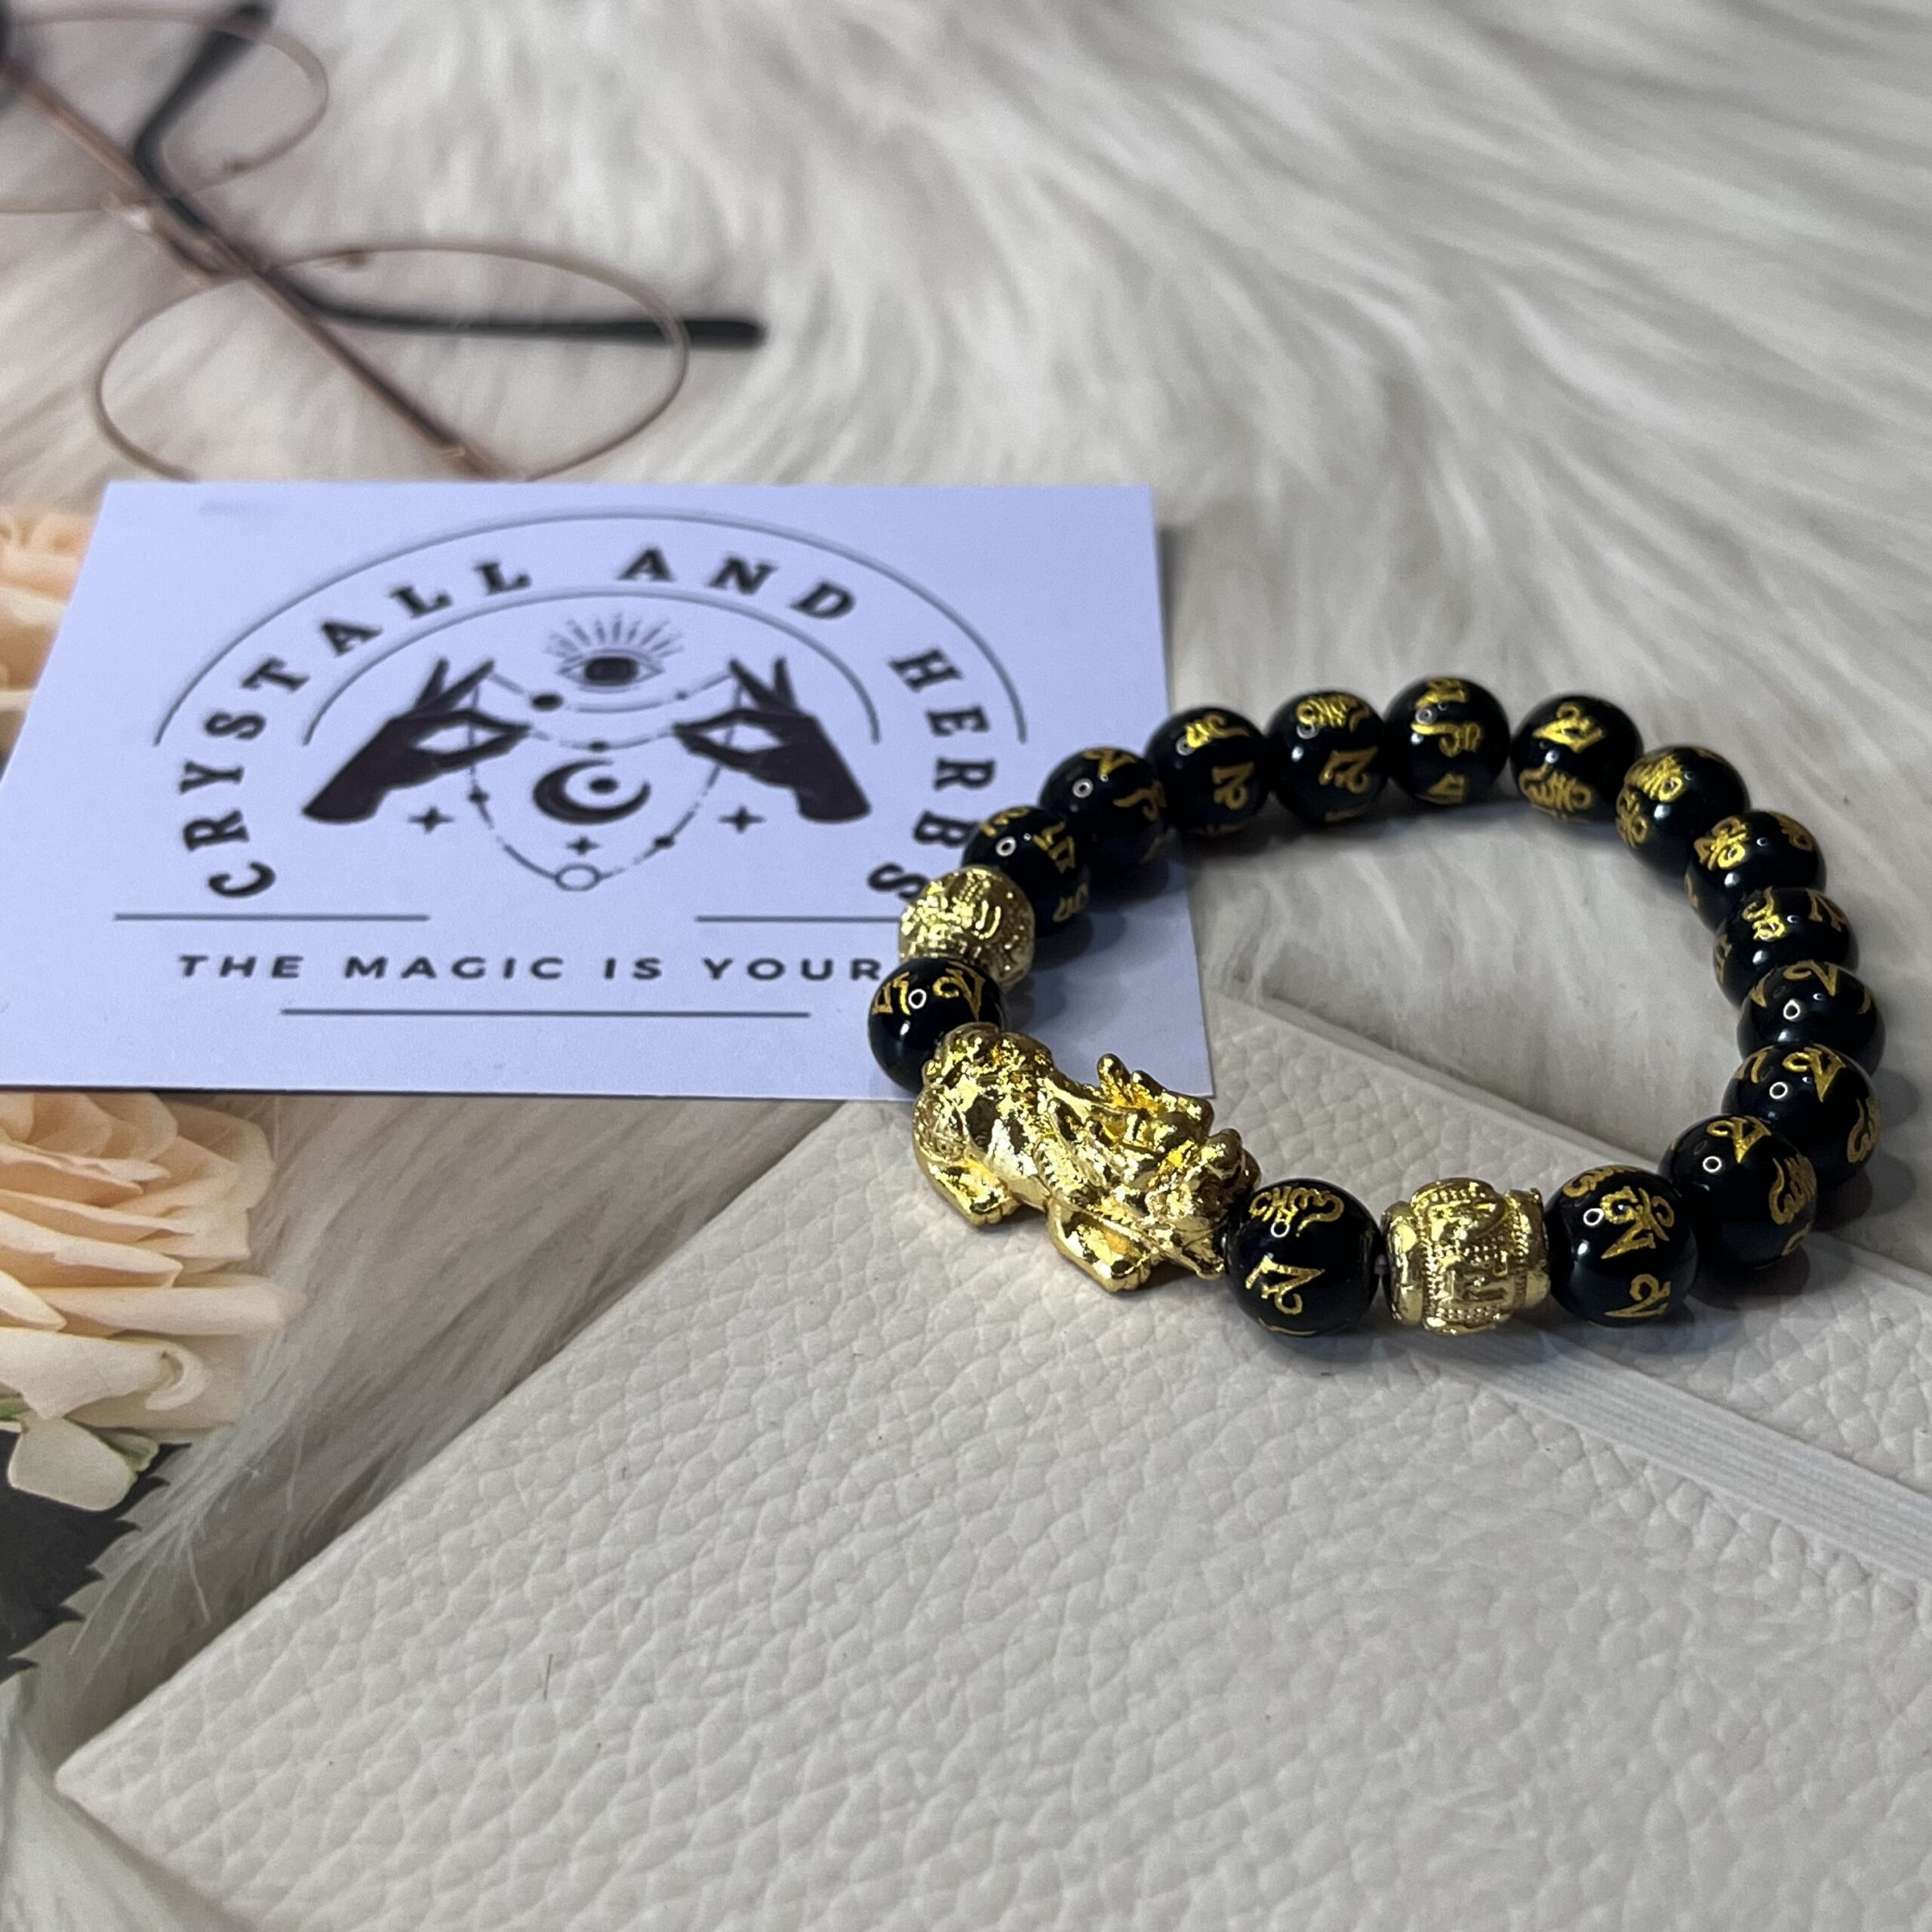 Real Feng Shui Obsidian Bracelet- The truth about FAKE vs. Authentic Pixiu  Bracelet is here in few words.